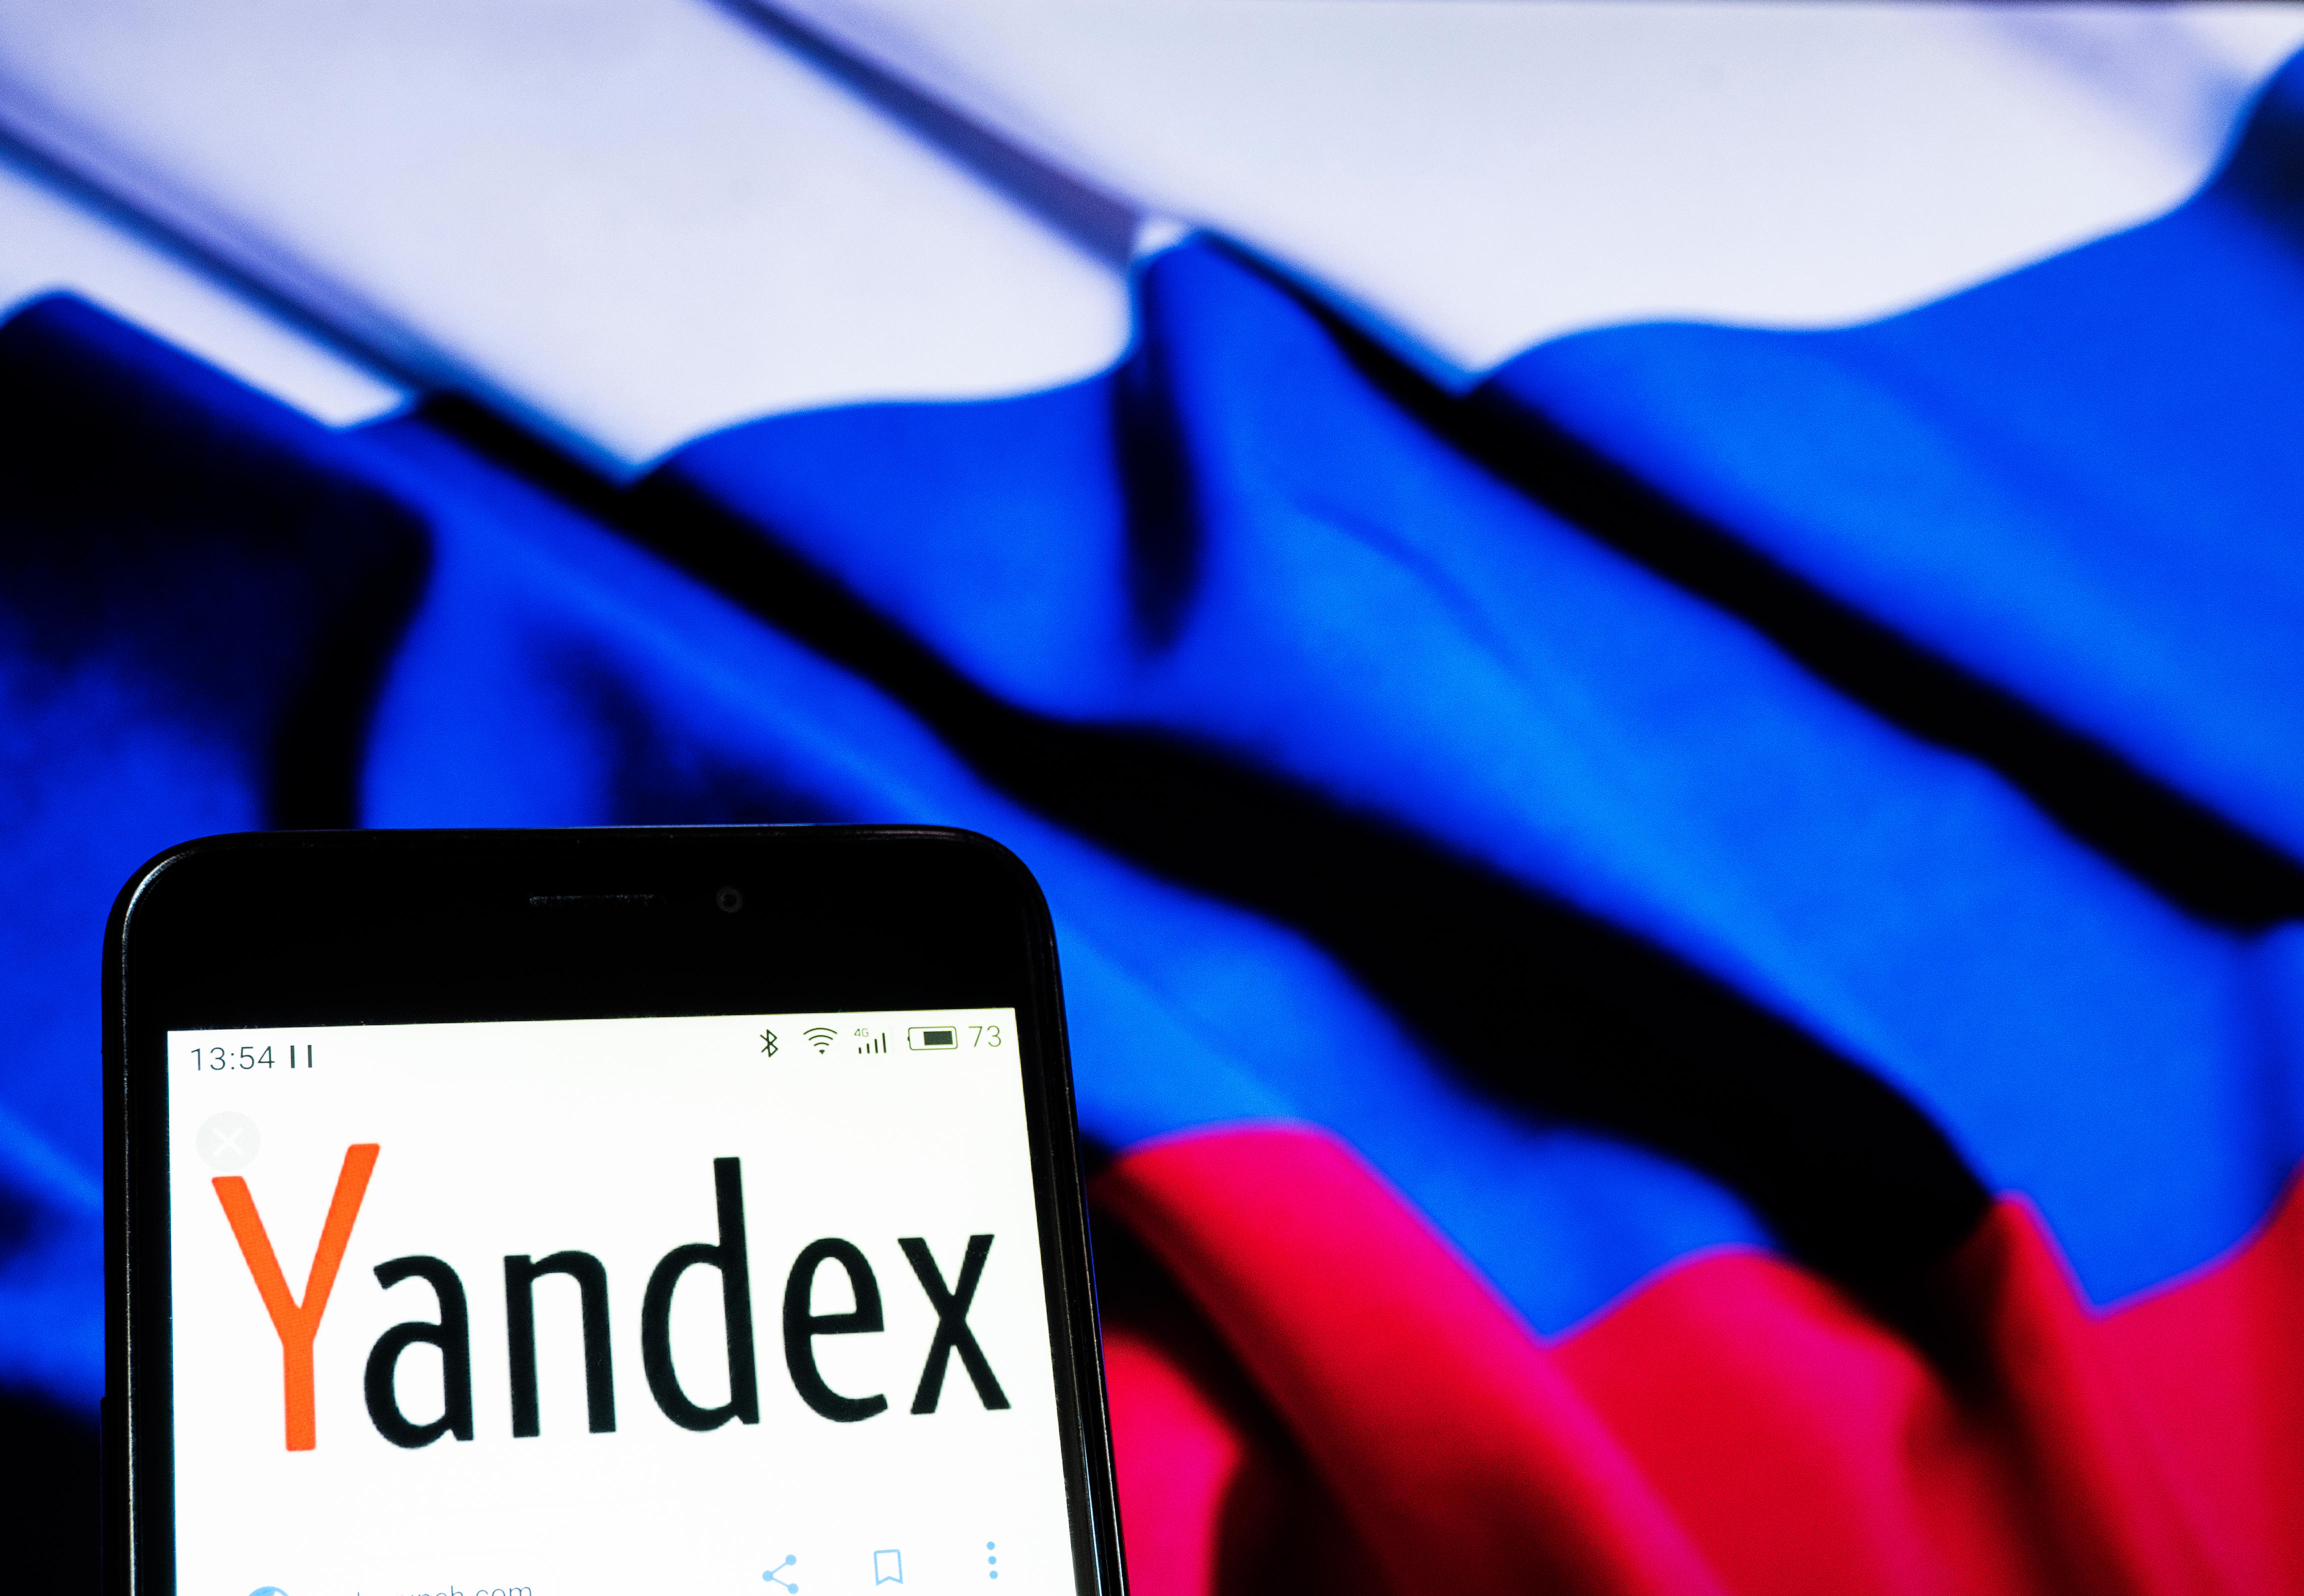 Yandex Data Center in Finland Is Left Without Power | Data Center Knowledge